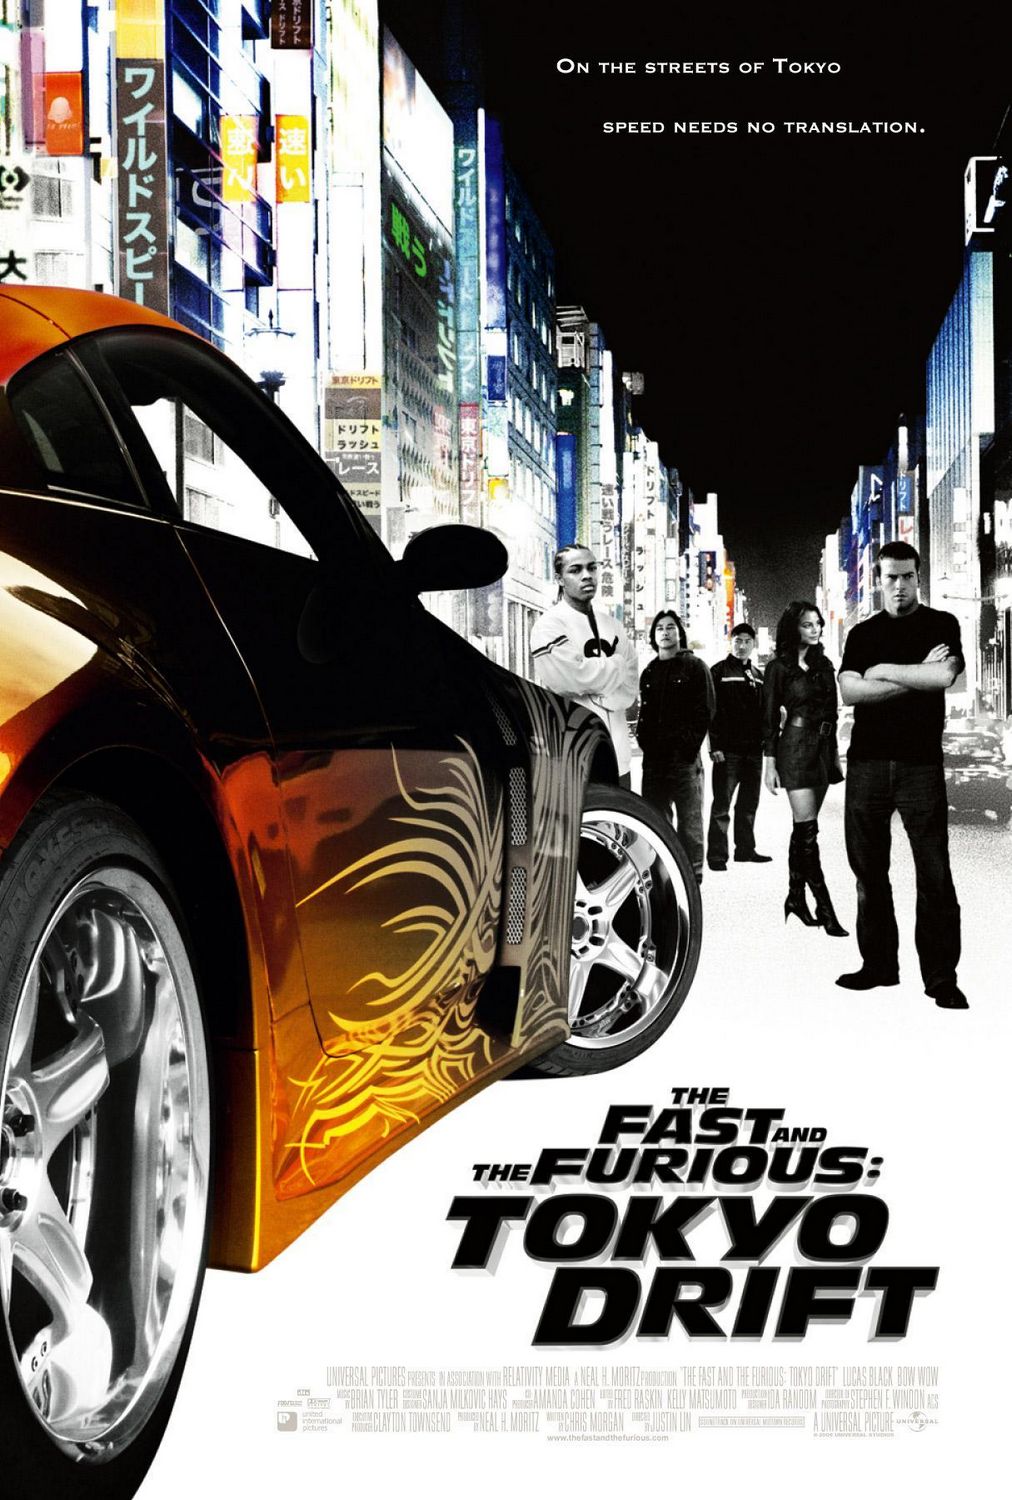 The Fast and the Furious (2006 video game) - Wikipedia